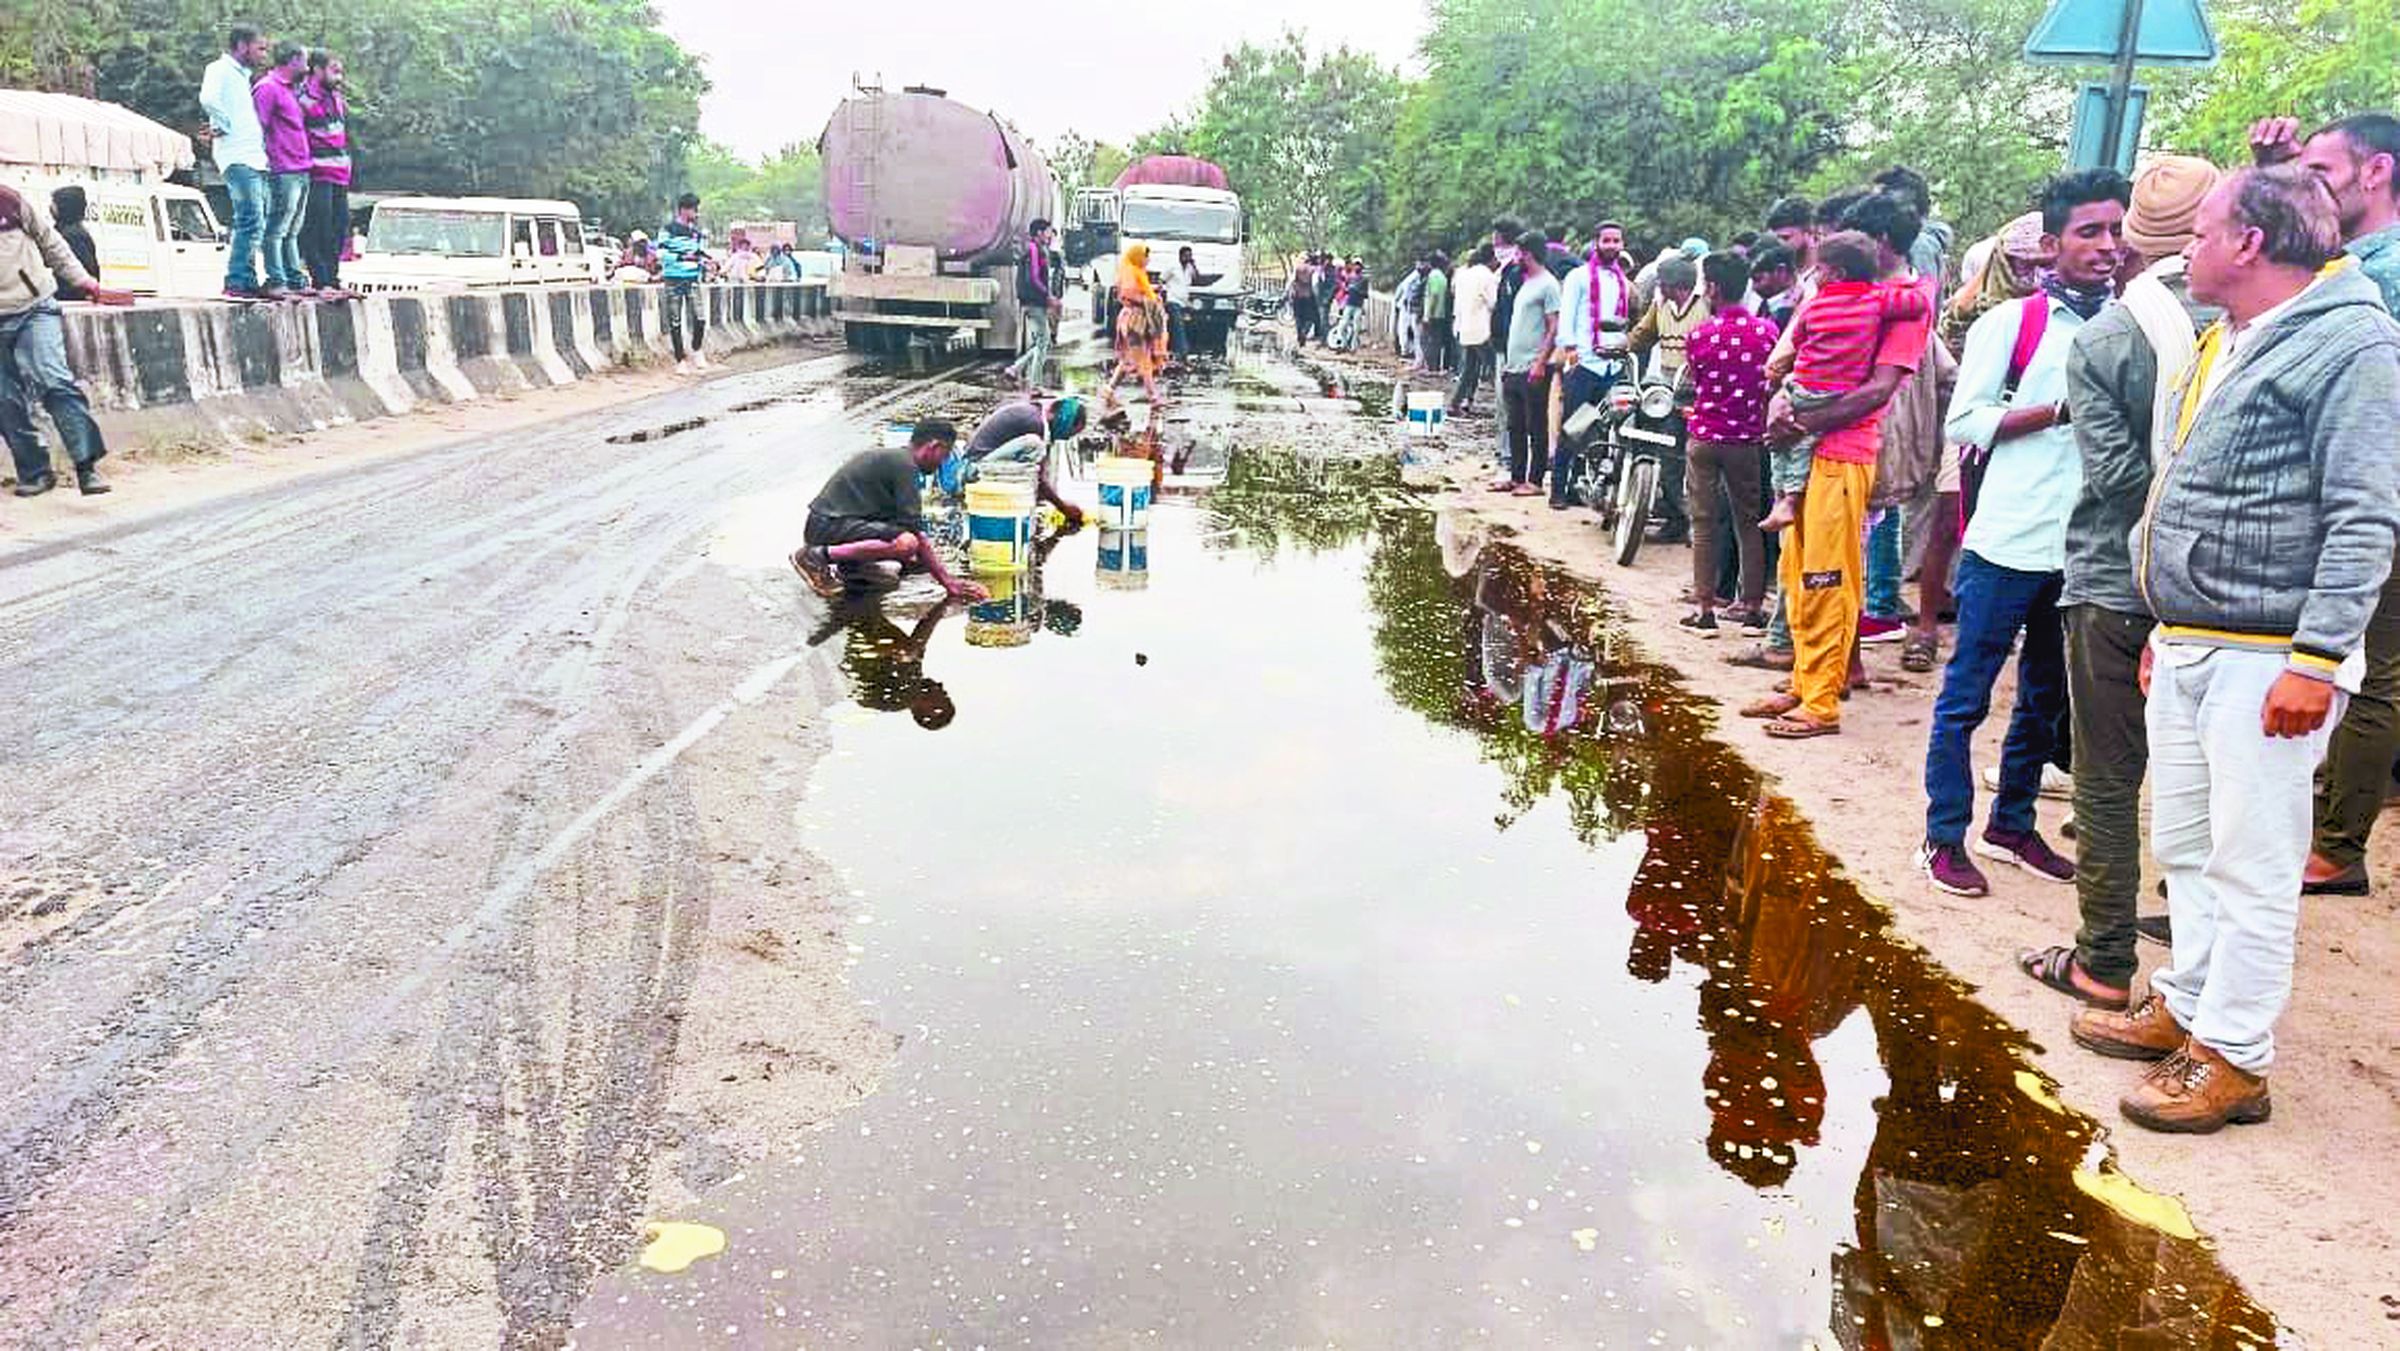 Tanker filled with soybean oil overturned, villagers gathered to loot